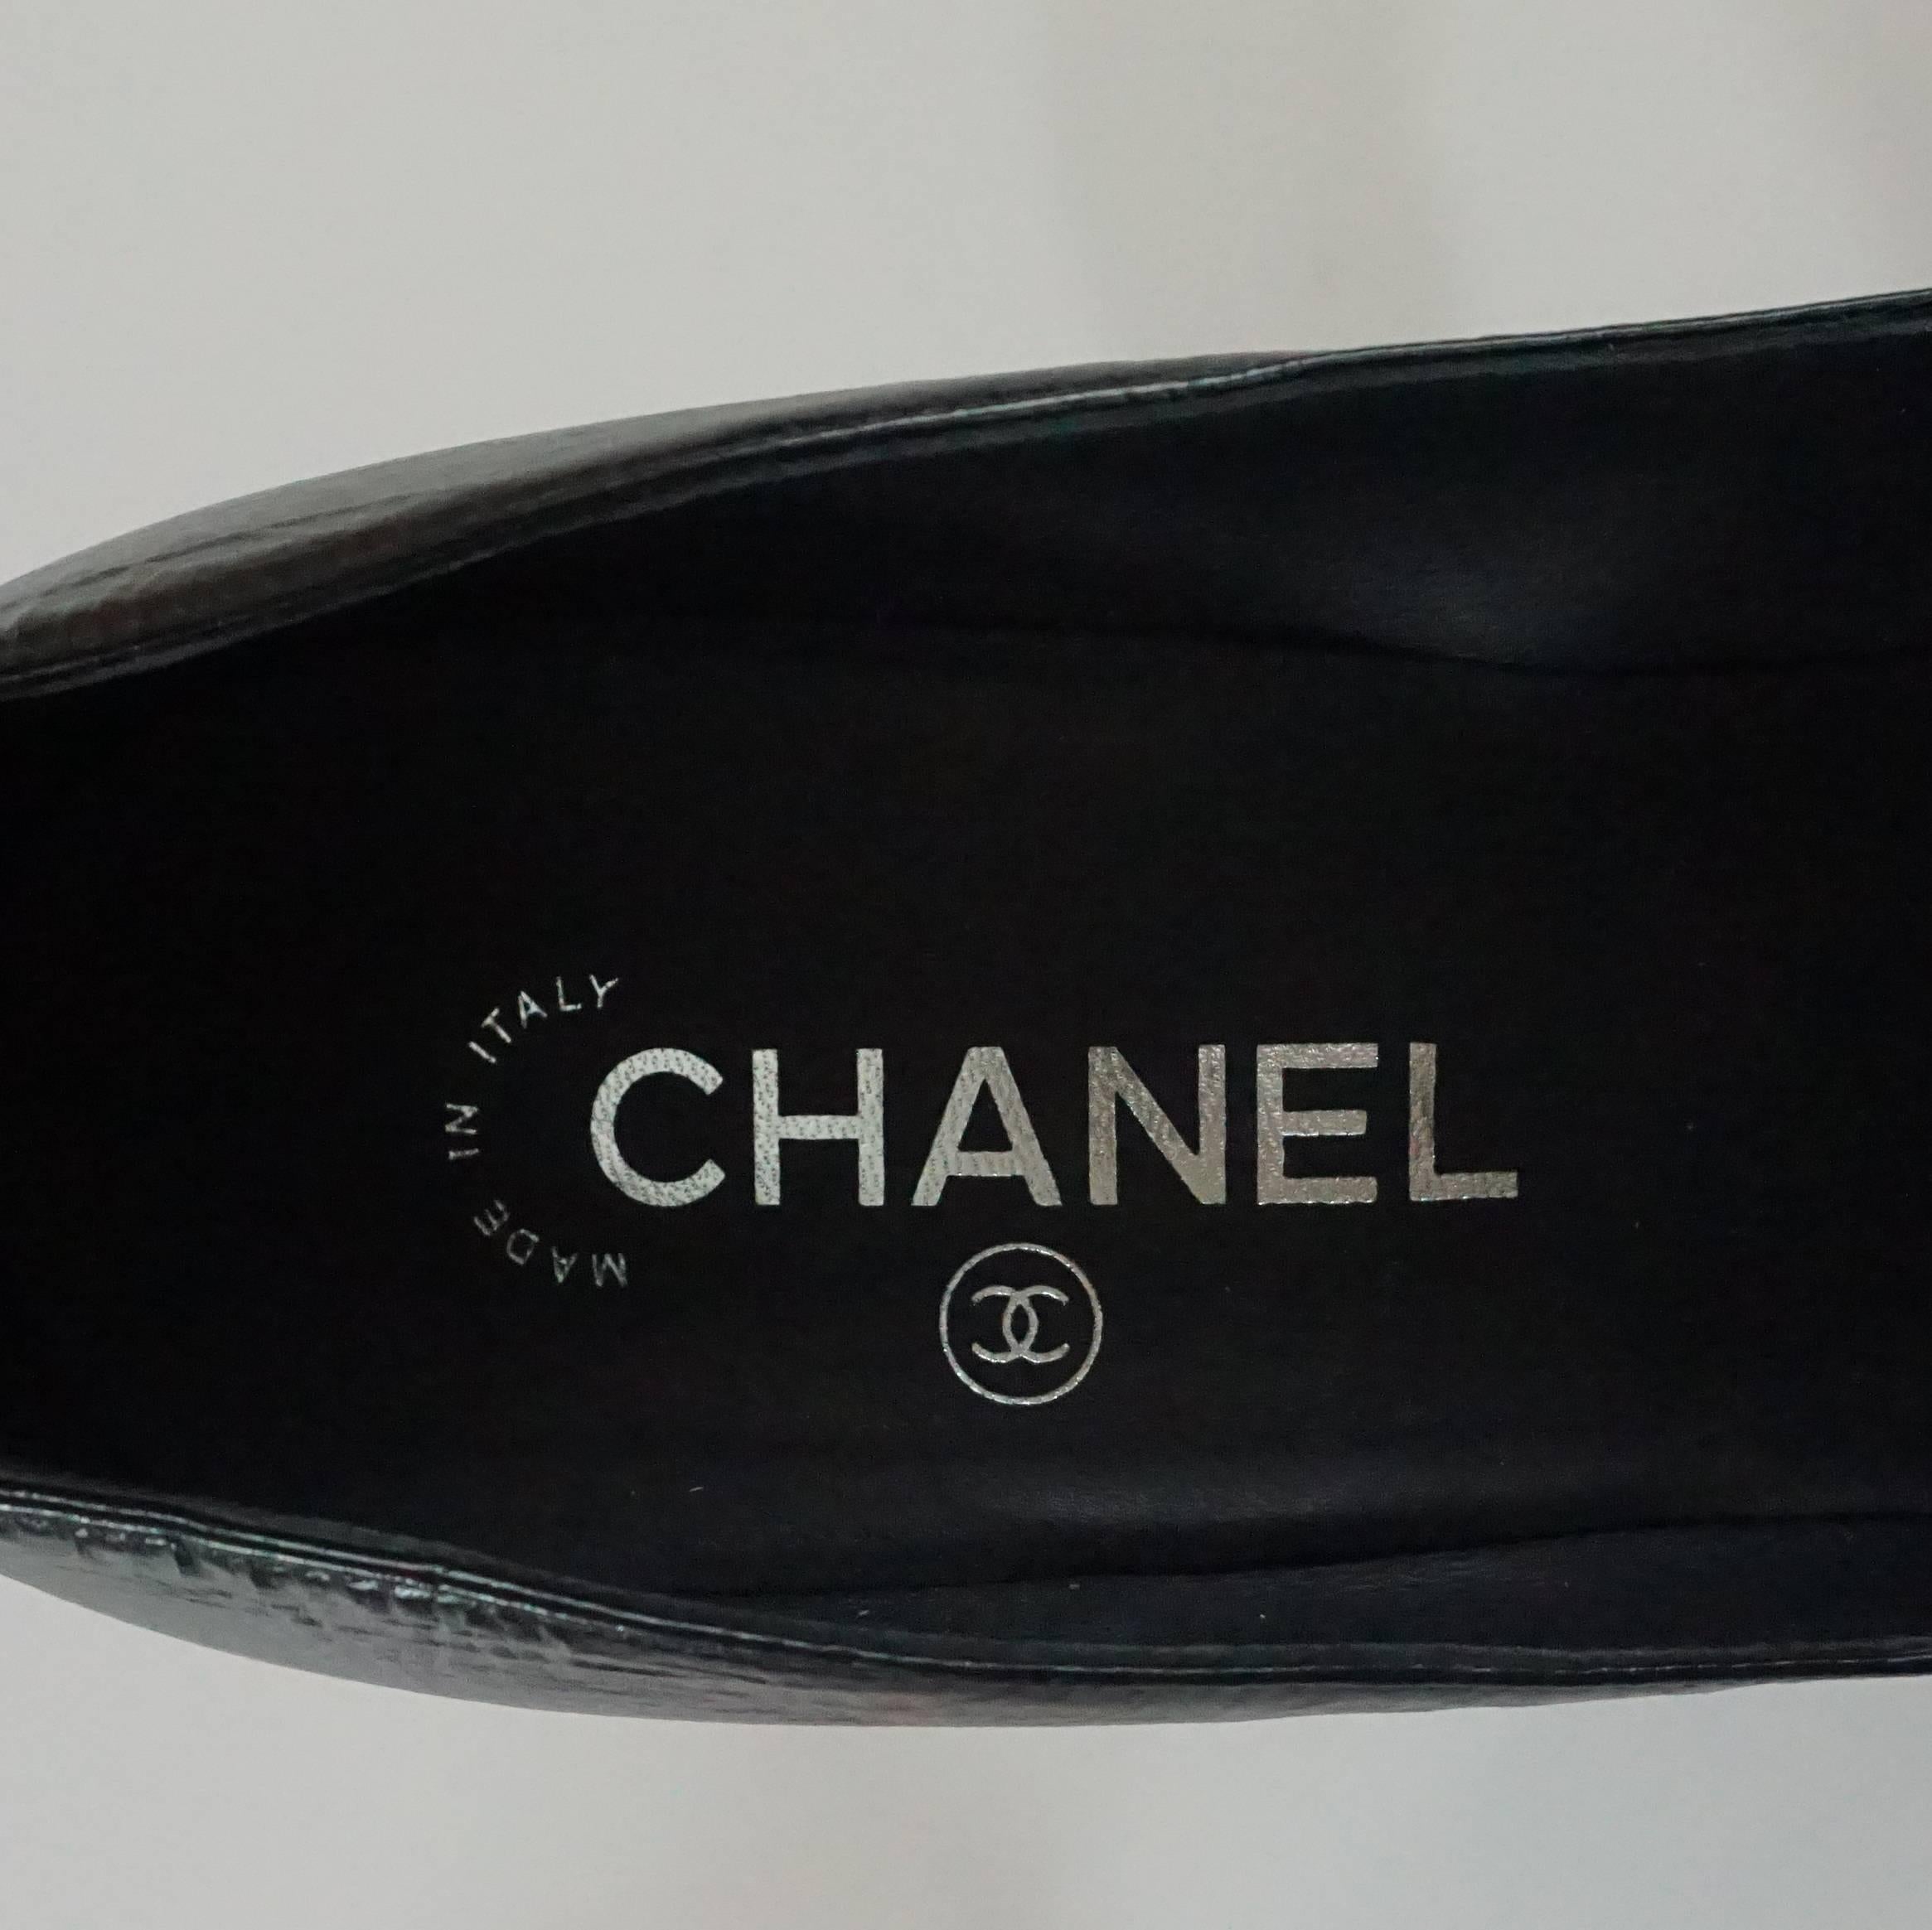 Chanel Black Leather and Patent Pump w/ Rope Knot Heel - 40.5 3